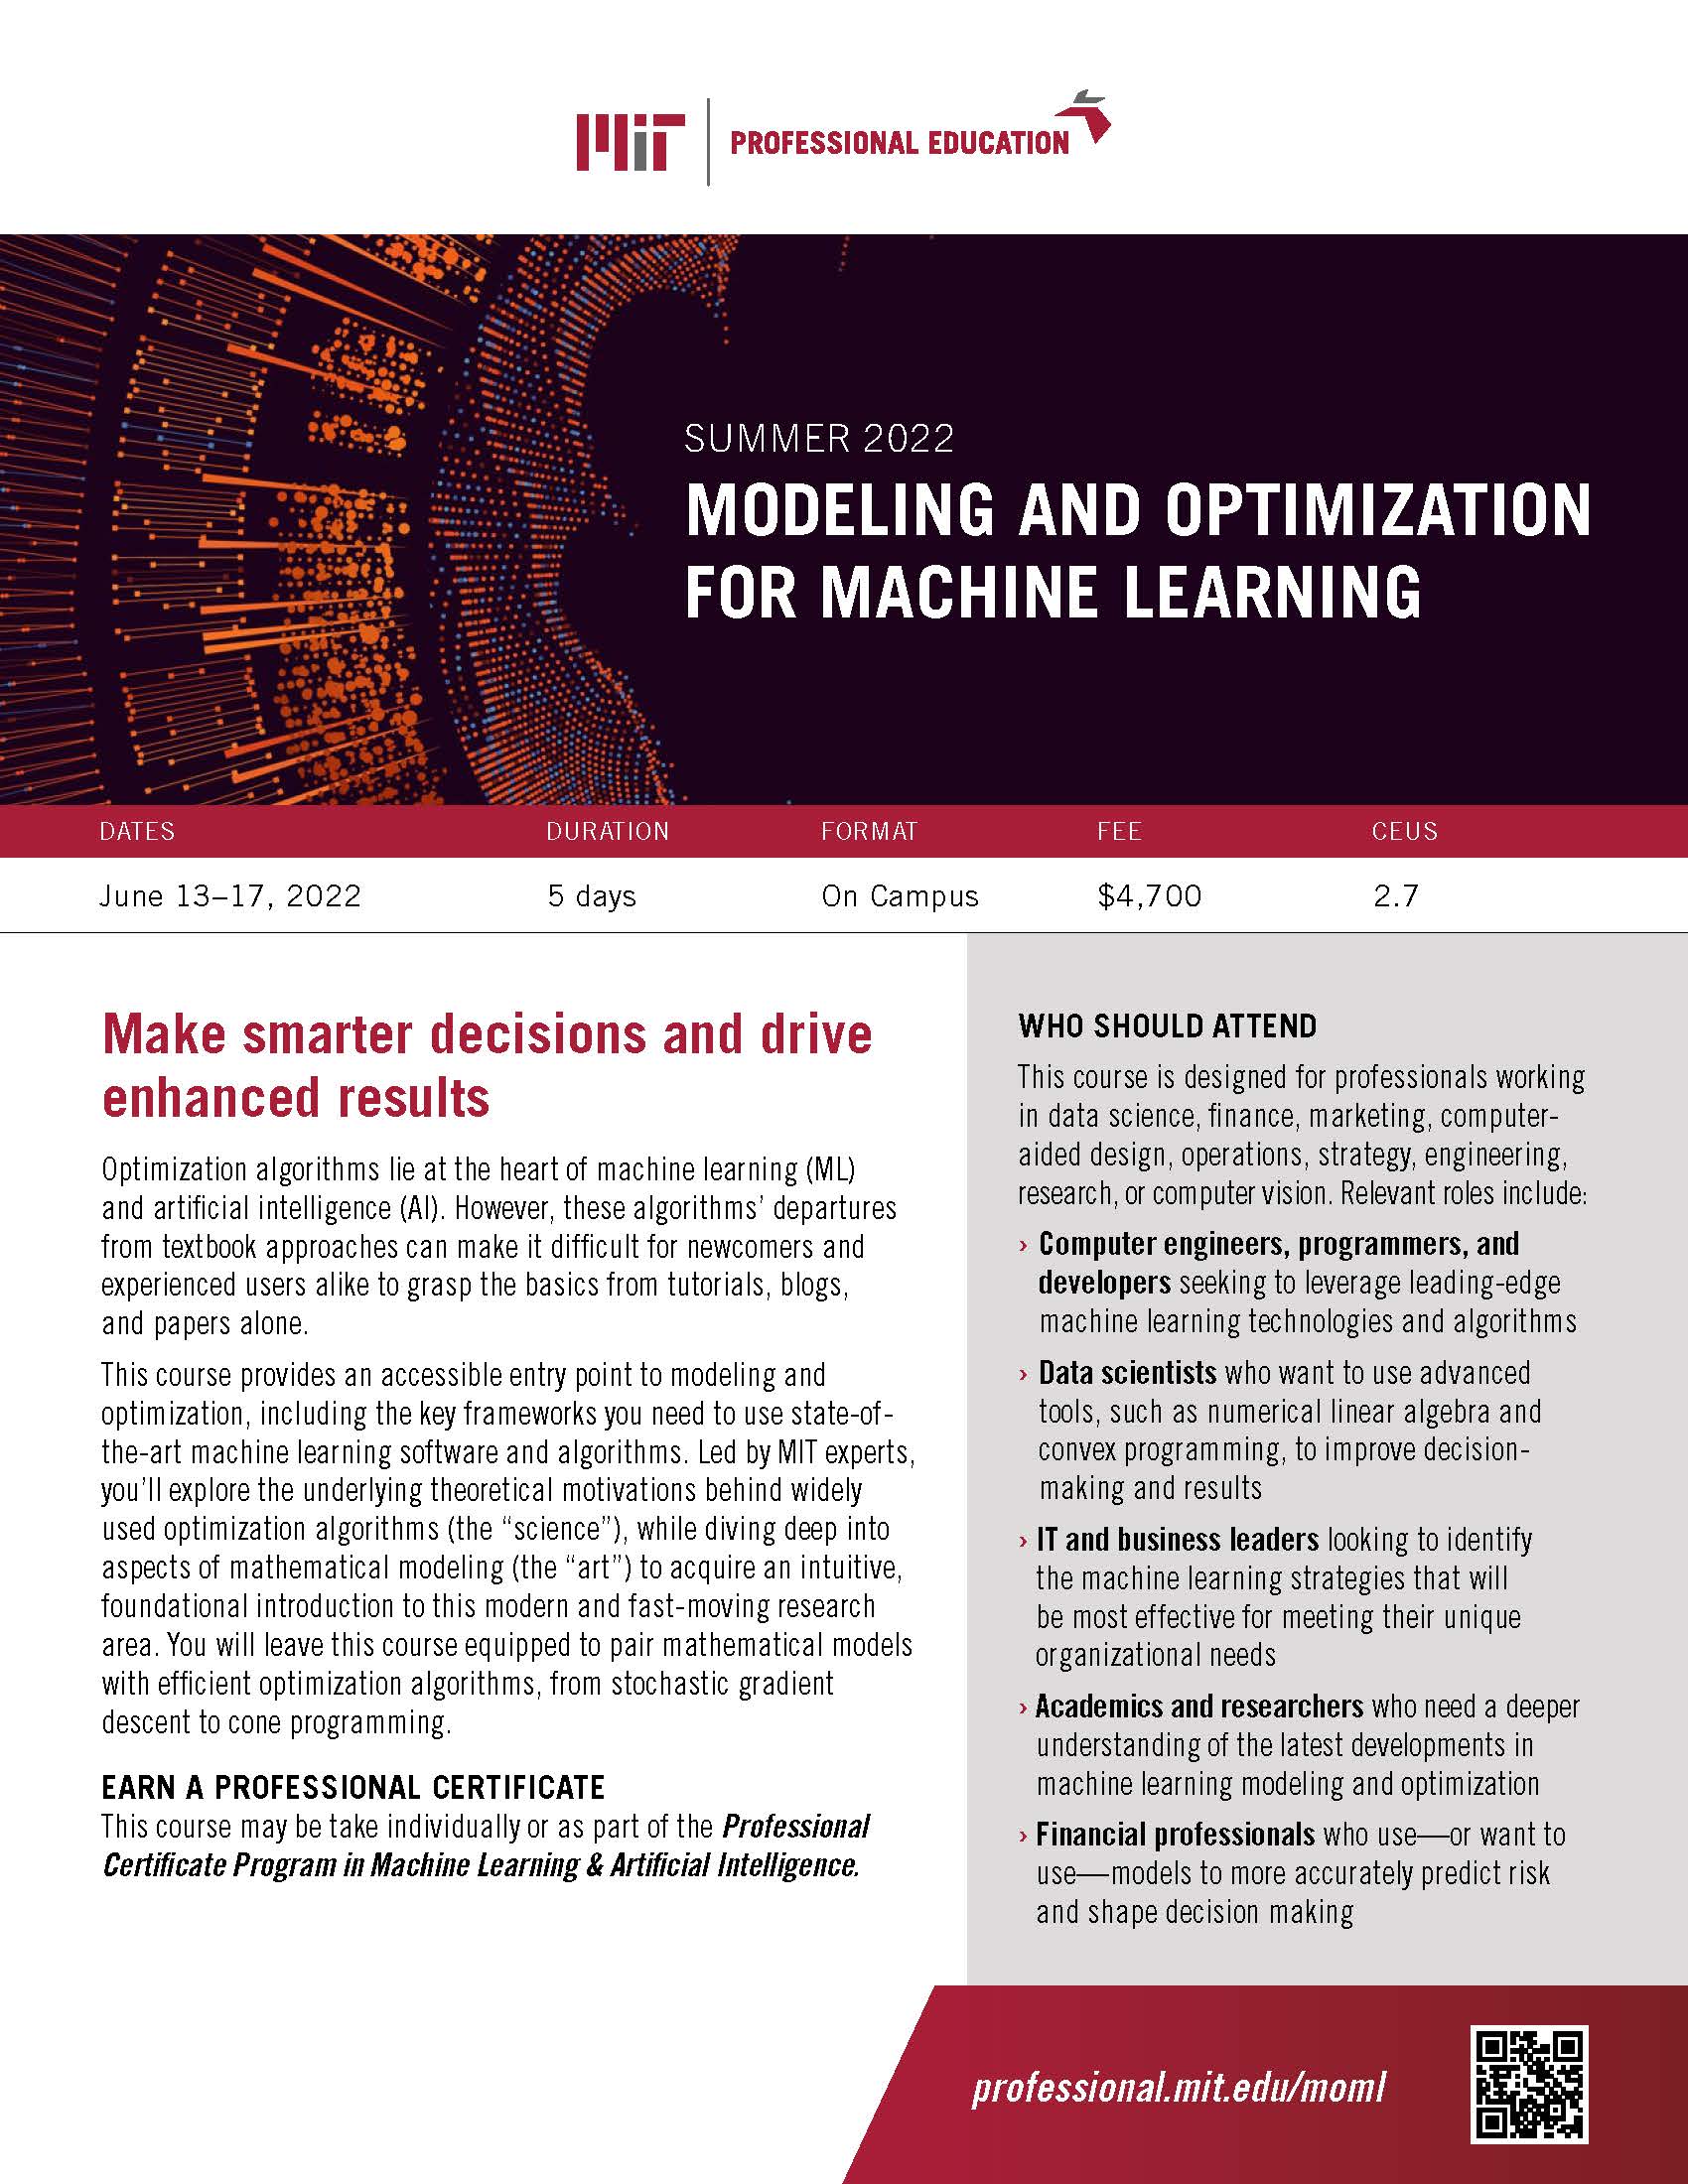 Image of Modeling and Optimization for Machine Learning Brochure